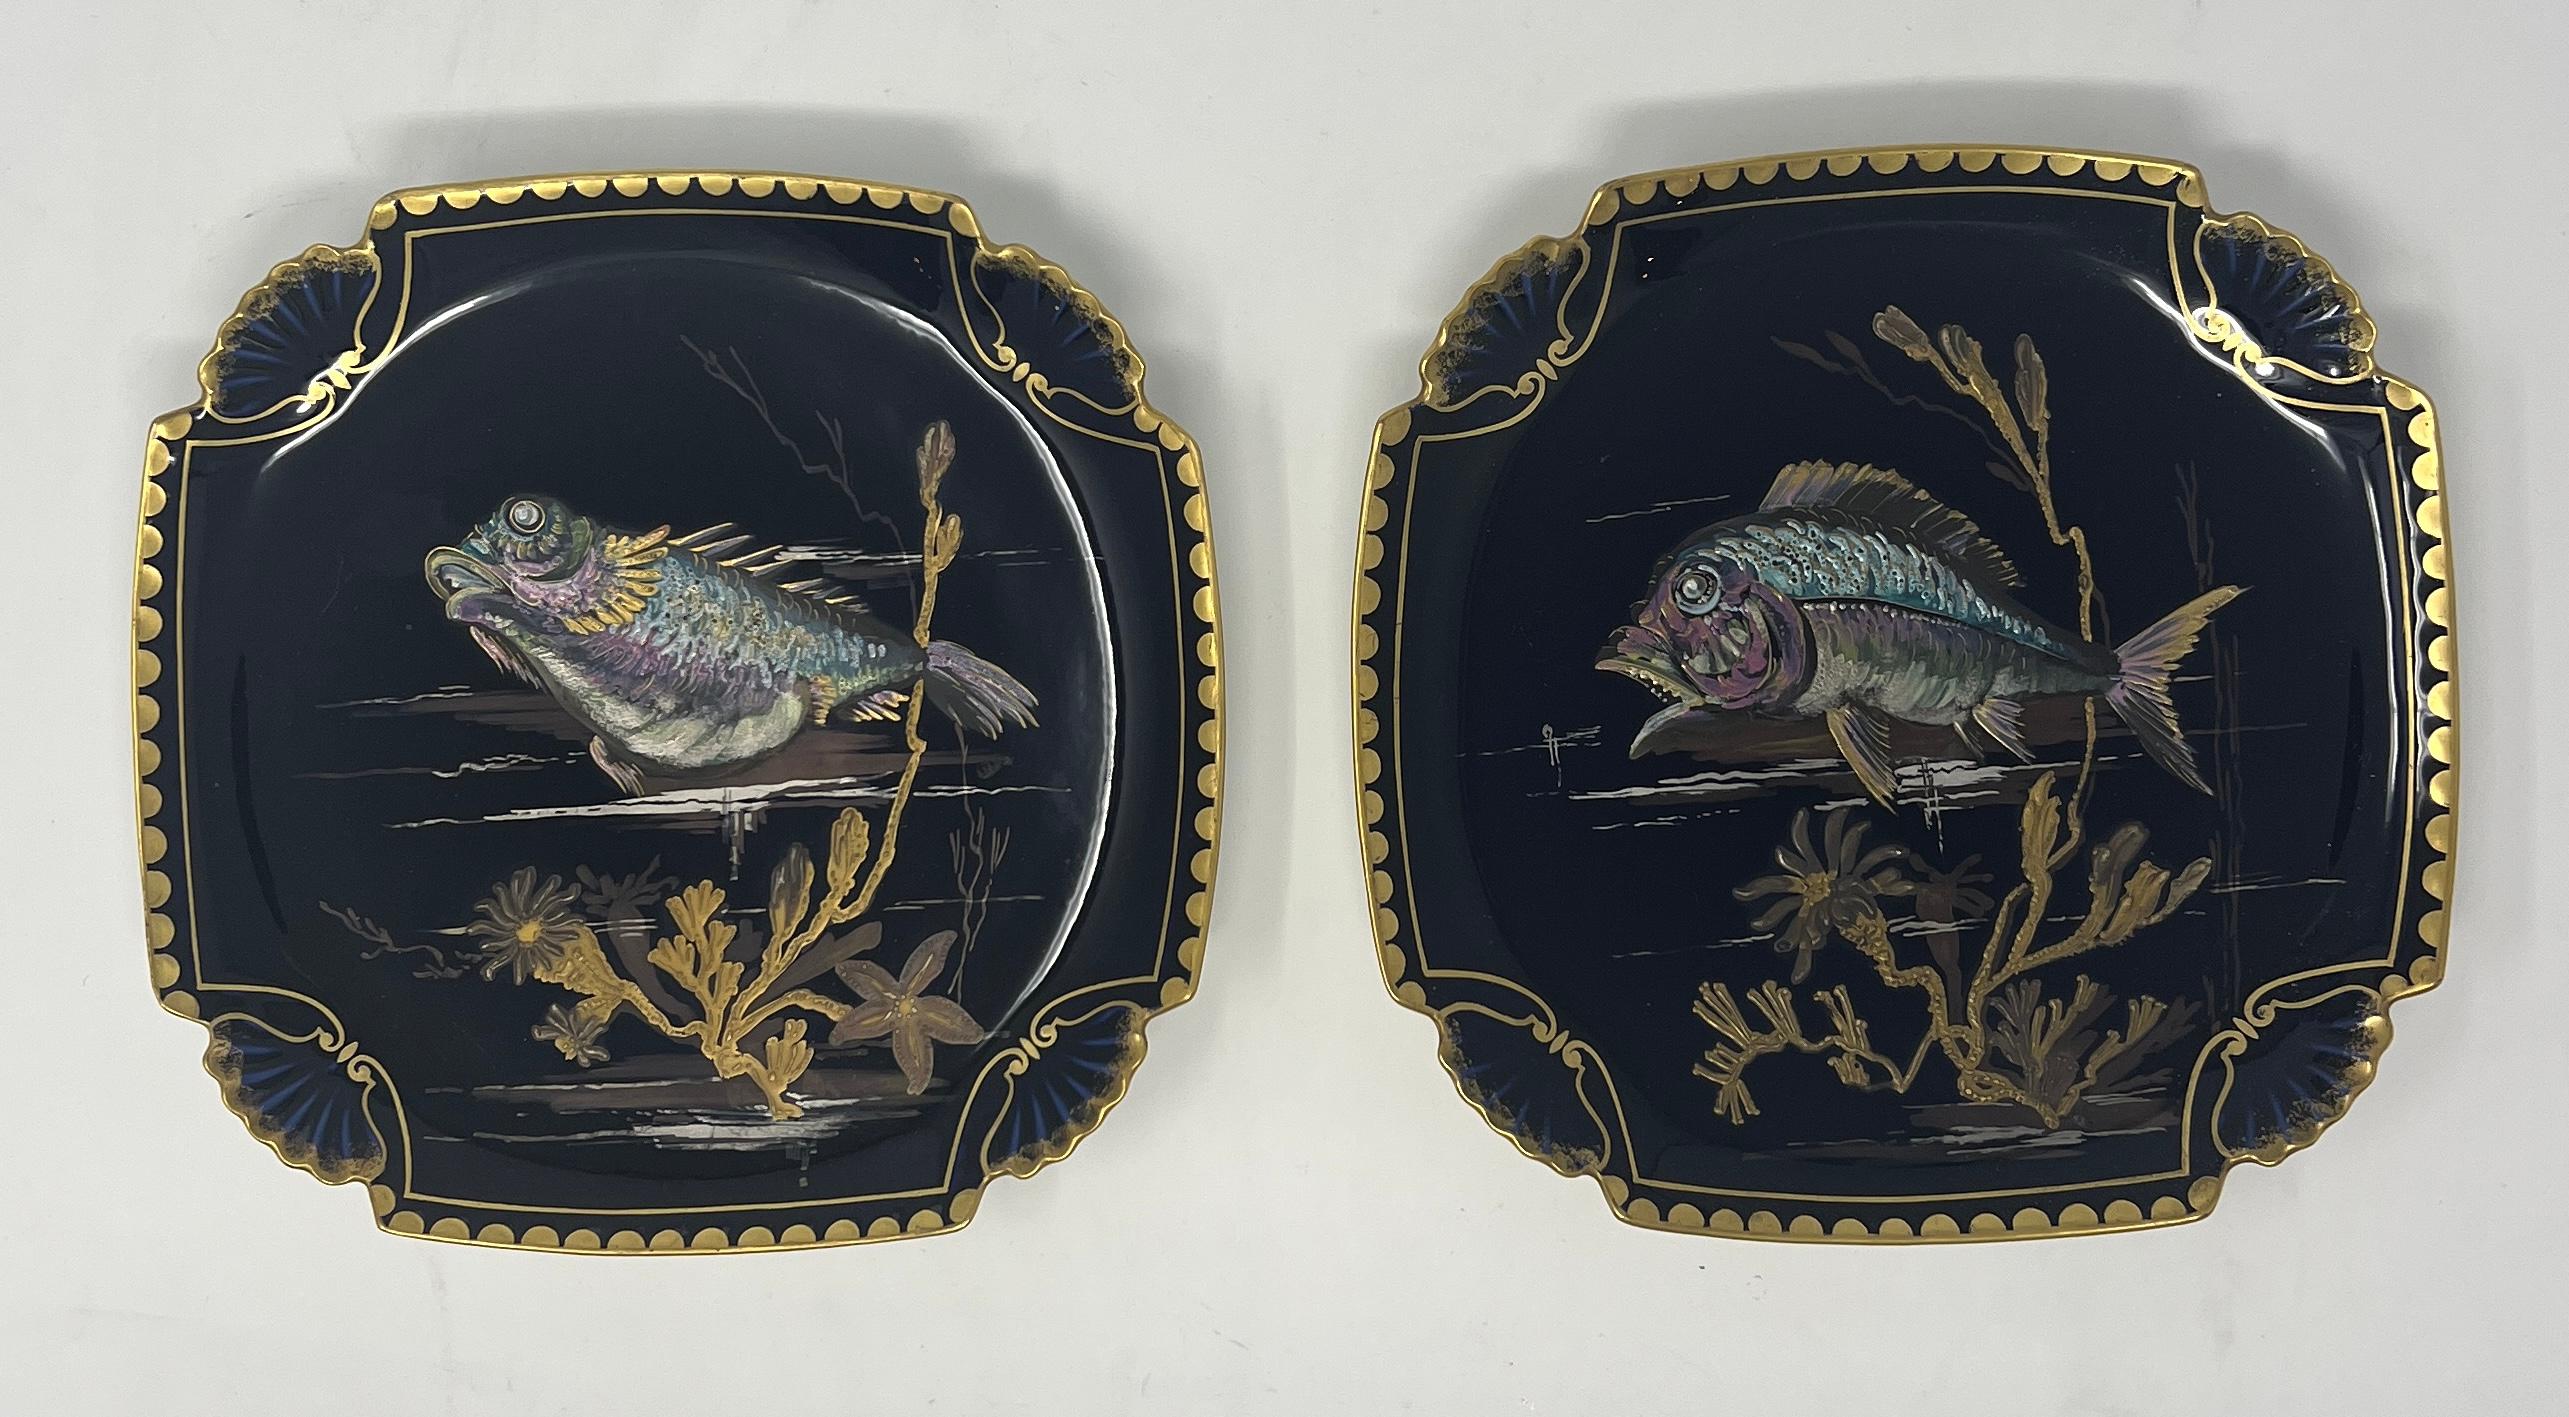 Set of 10 Antique French Limoges Porcelain Hand-Painted Cobalt Blue and Gold Fish Plates, Circa 1890's.